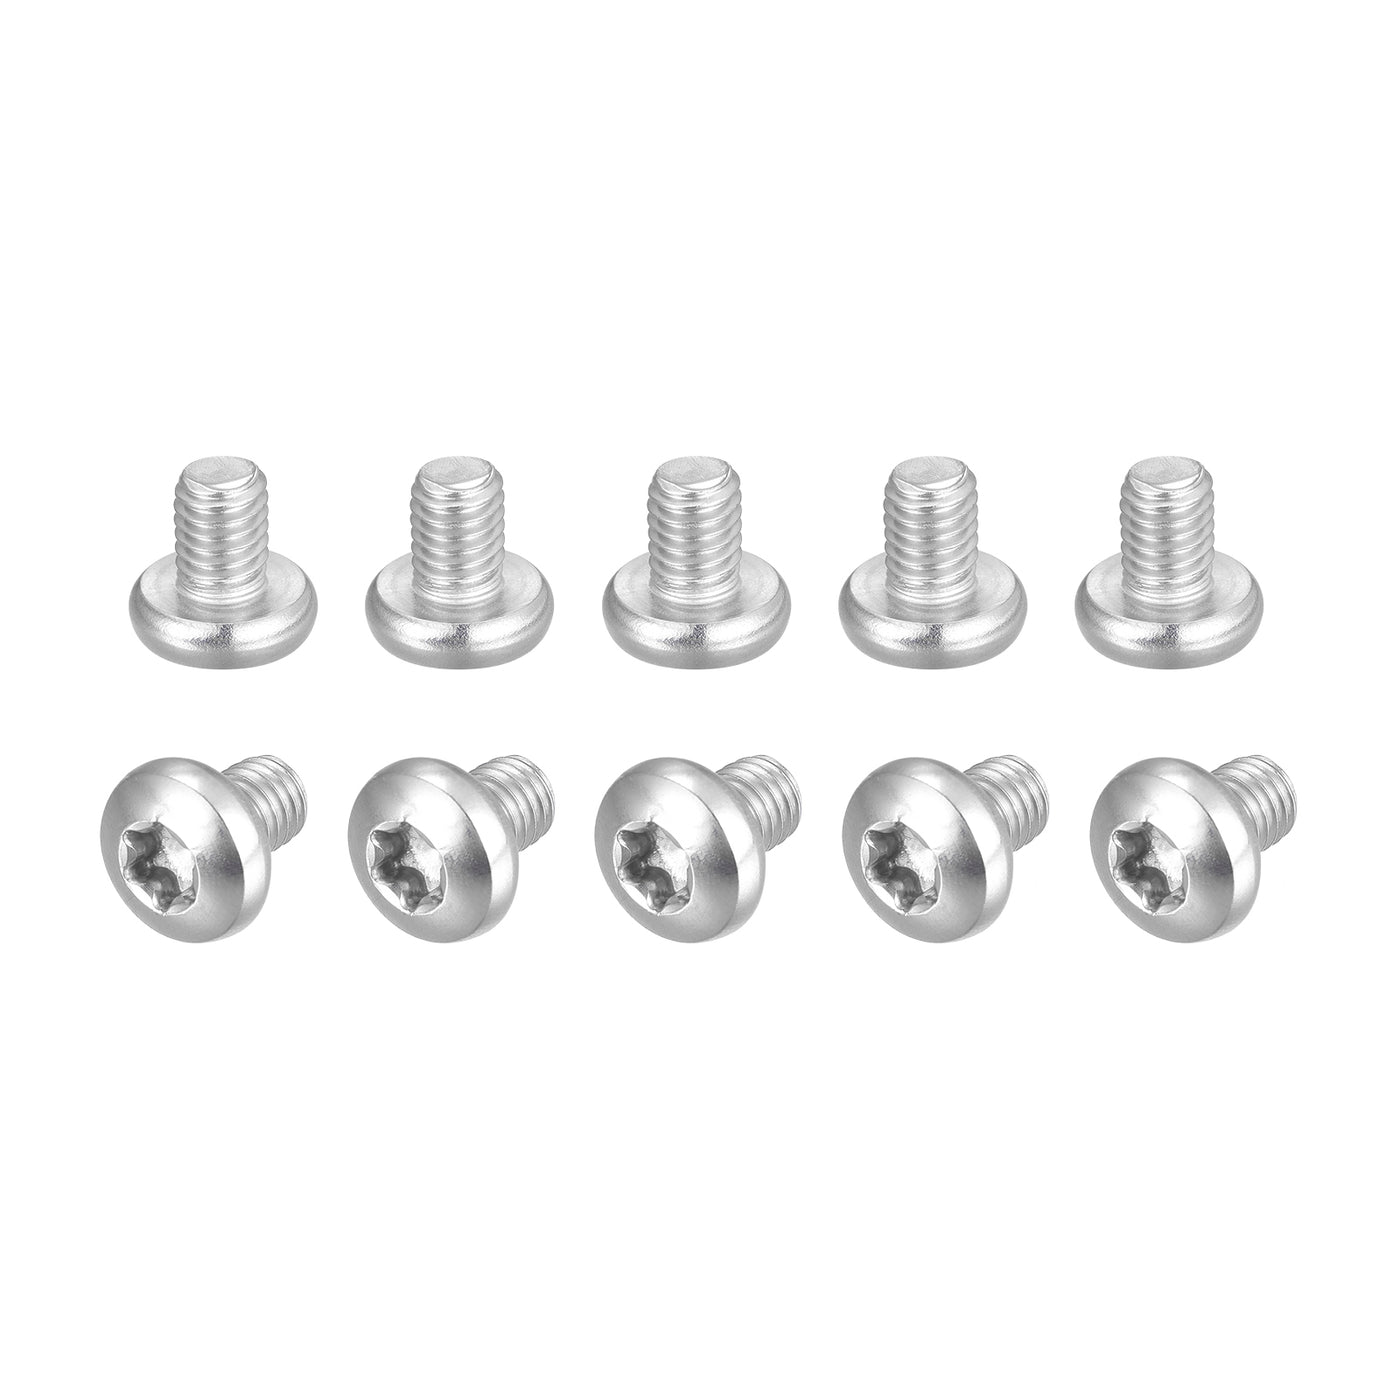 uxcell Uxcell M6x8mm Torx Security Machine Screws, 20pcs 316 Stainless Steel Pan Head Screw